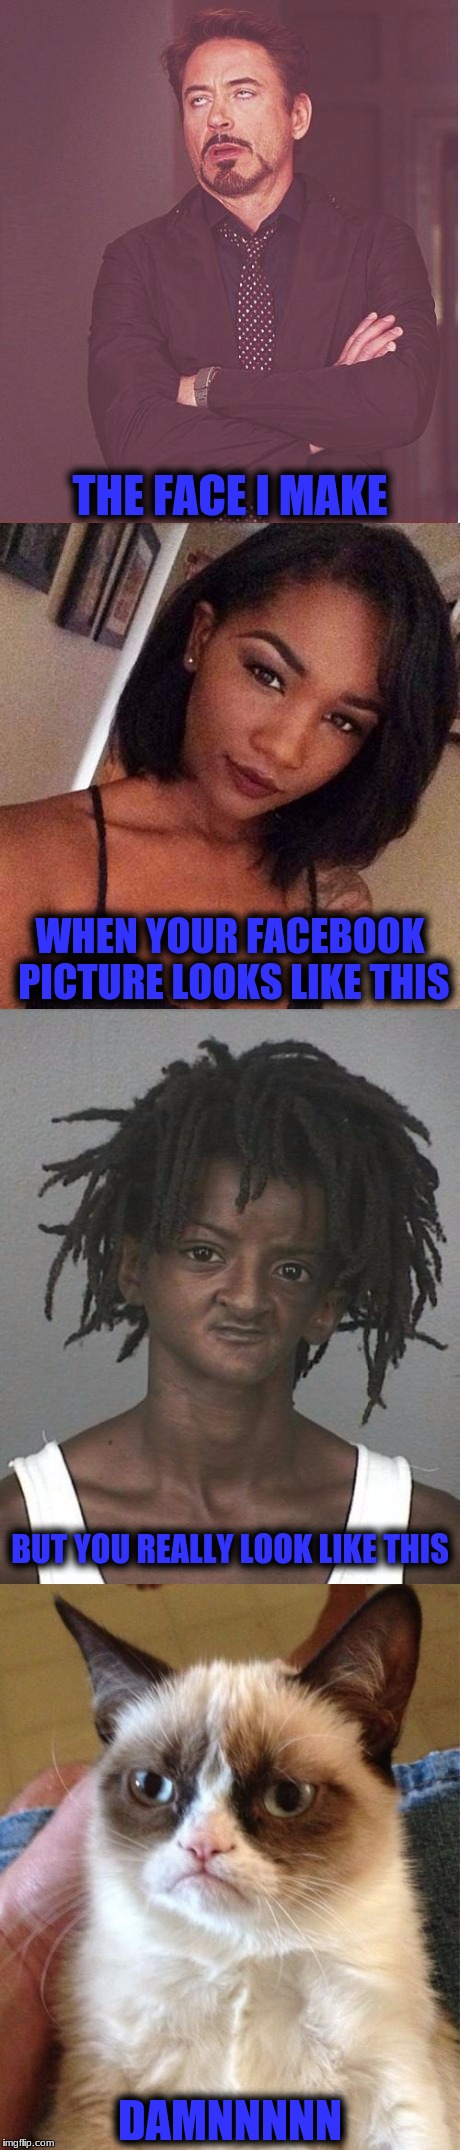 So Many Fake Profiles! | THE FACE I MAKE; WHEN YOUR FACEBOOK PICTURE LOOKS LIKE THIS; BUT YOU REALLY LOOK LIKE THIS; DAMNNNNN | image tagged in memes,facebook scamers,y u no look like picture | made w/ Imgflip meme maker